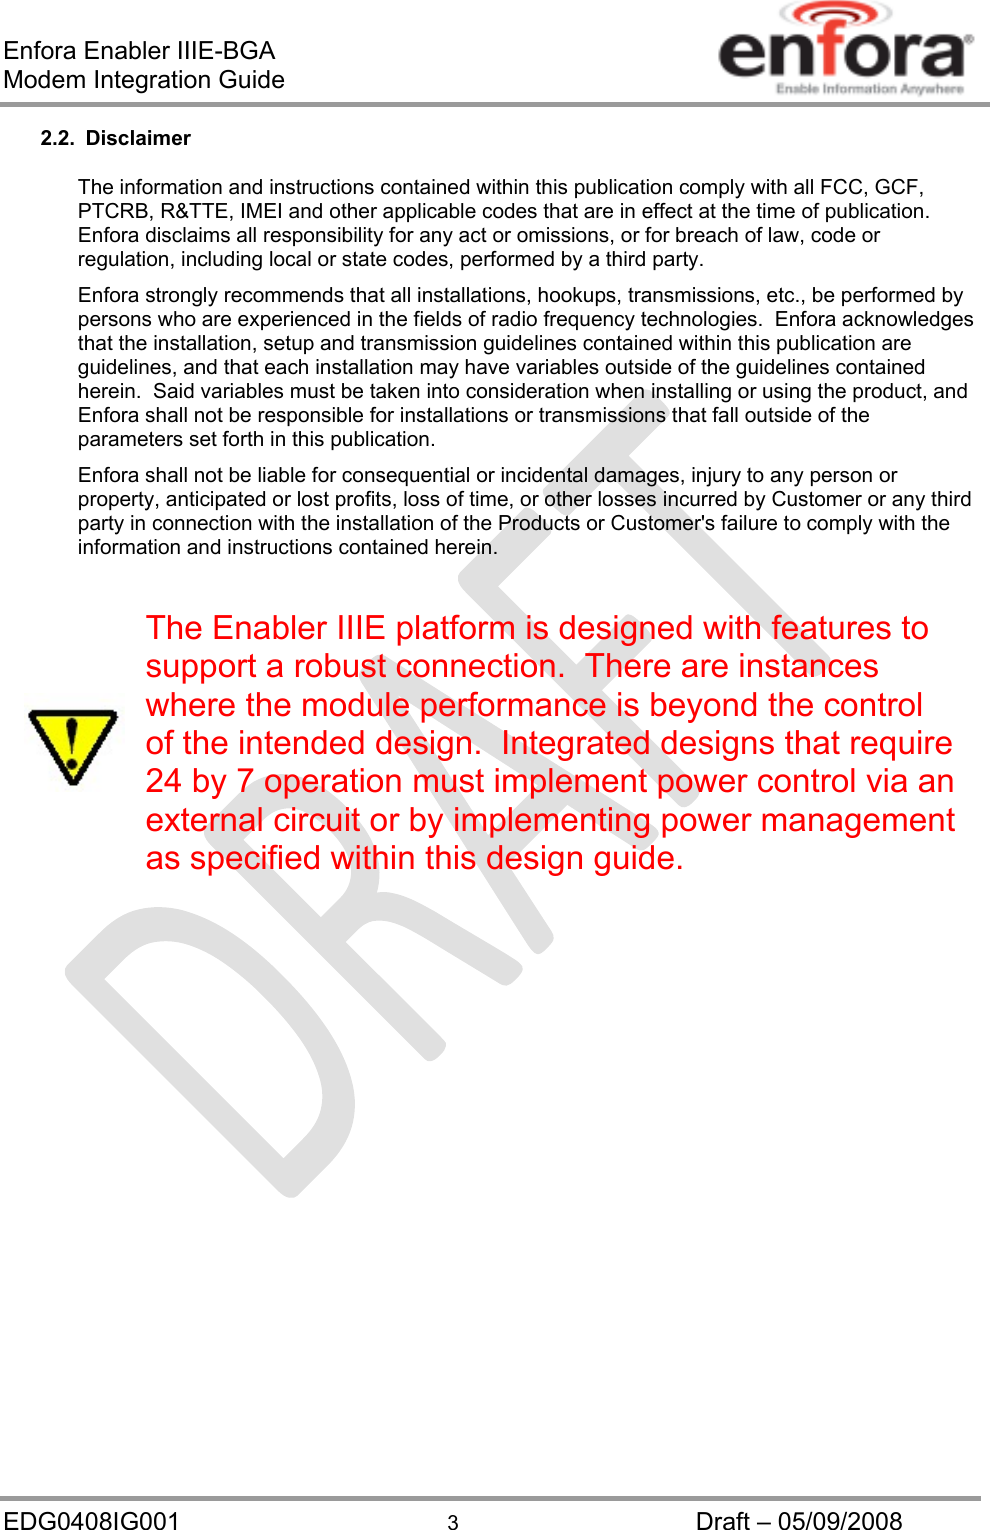 Enfora Enabler IIIE-BGA Modem Integration Guide EDG0408IG001  3  Draft – 05/09/2008 2.2. Disclaimer The information and instructions contained within this publication comply with all FCC, GCF, PTCRB, R&amp;TTE, IMEI and other applicable codes that are in effect at the time of publication.  Enfora disclaims all responsibility for any act or omissions, or for breach of law, code or regulation, including local or state codes, performed by a third party. Enfora strongly recommends that all installations, hookups, transmissions, etc., be performed by persons who are experienced in the fields of radio frequency technologies.  Enfora acknowledges that the installation, setup and transmission guidelines contained within this publication are guidelines, and that each installation may have variables outside of the guidelines contained herein.  Said variables must be taken into consideration when installing or using the product, and Enfora shall not be responsible for installations or transmissions that fall outside of the parameters set forth in this publication. Enfora shall not be liable for consequential or incidental damages, injury to any person or property, anticipated or lost profits, loss of time, or other losses incurred by Customer or any third party in connection with the installation of the Products or Customer&apos;s failure to comply with the information and instructions contained herein.   The Enabler IIIE platform is designed with features to support a robust connection.  There are instances where the module performance is beyond the control of the intended design.  Integrated designs that require 24 by 7 operation must implement power control via an external circuit or by implementing power management as specified within this design guide.  